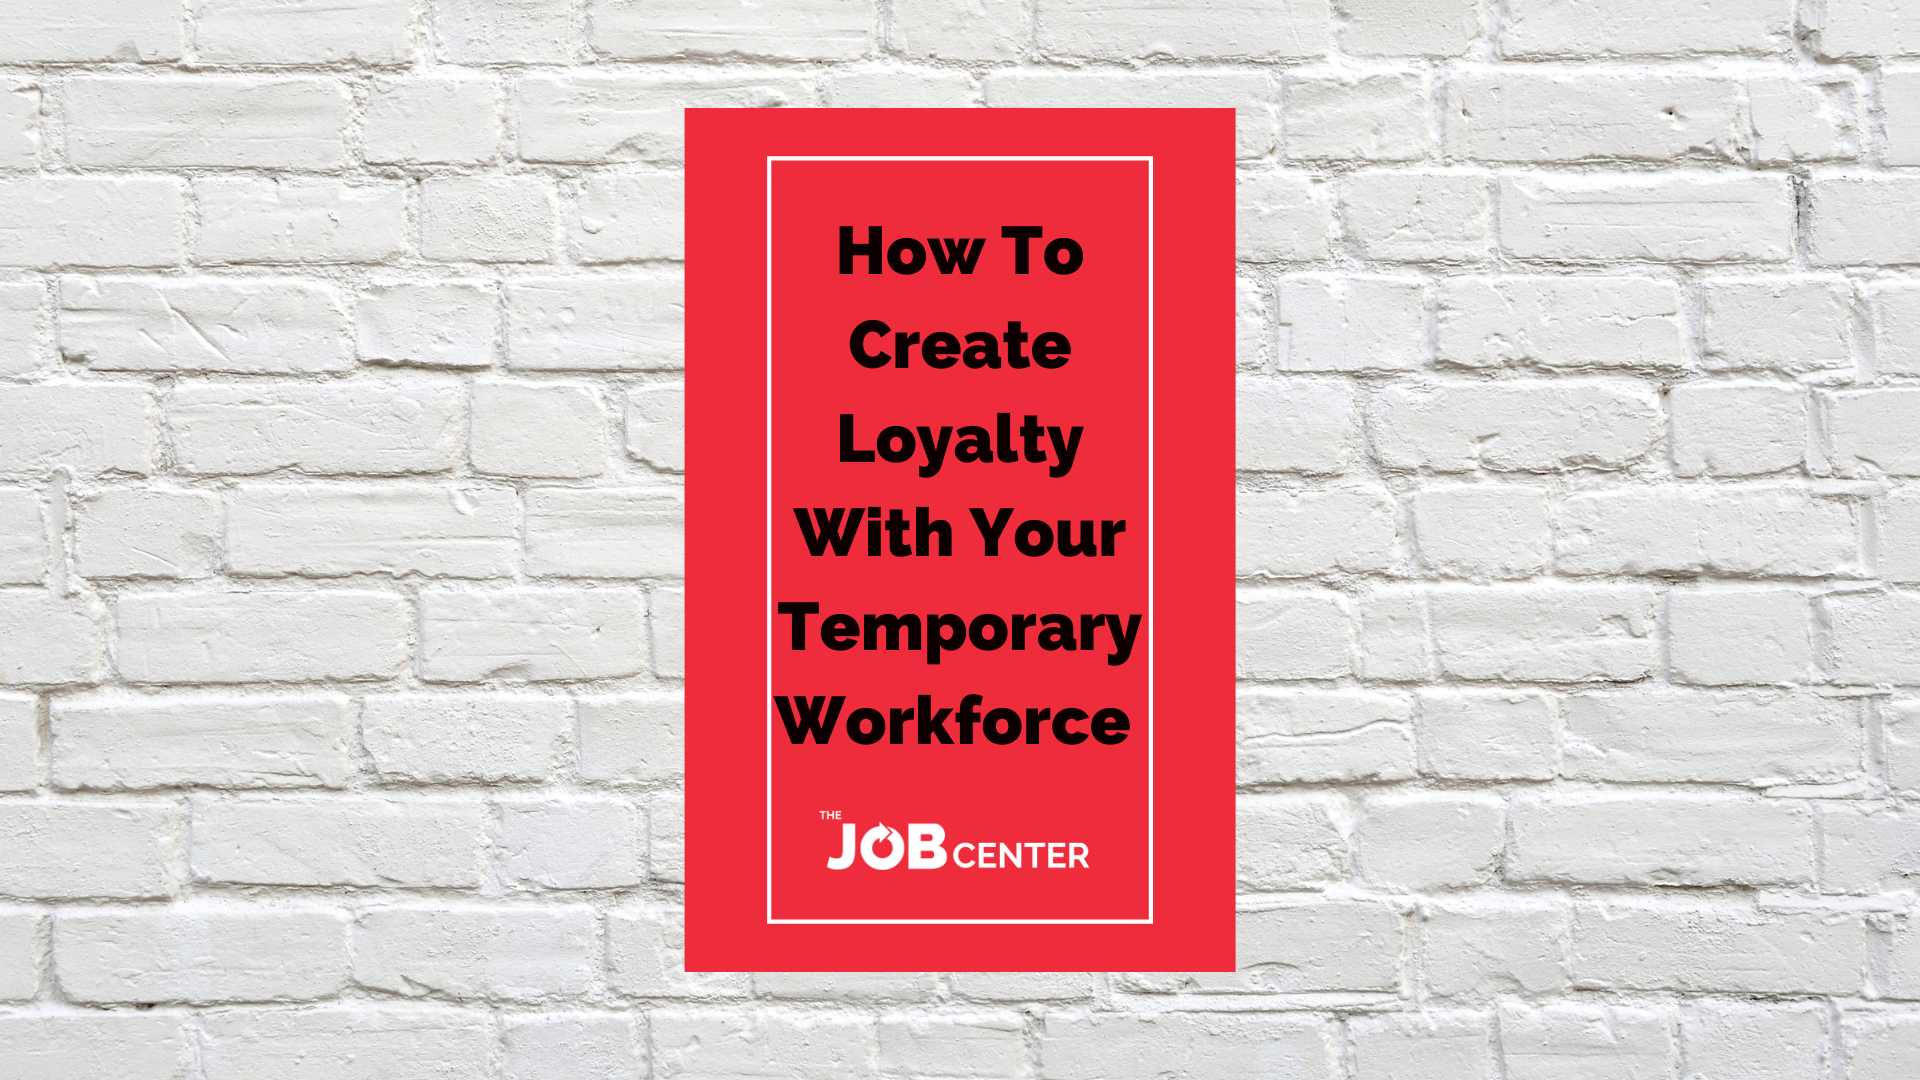 How To Create Loyalty With Your Temporary Workforce